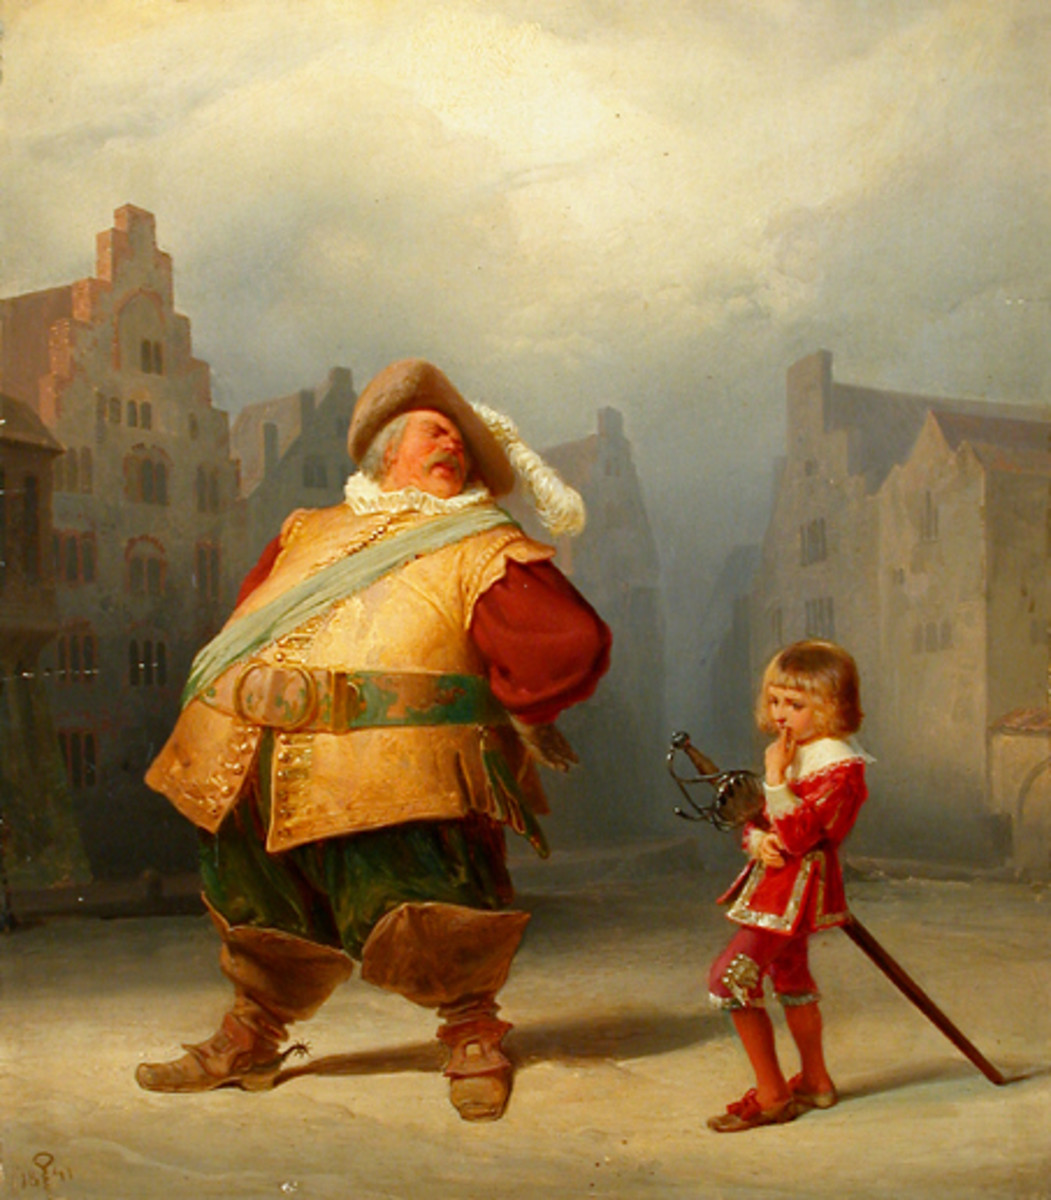 Sir John Falstaff, one of the most famous comic characters in all English literature, who appears in four of Shakespeare’s plays. Entirely the creation of Shakespeare, Falstaff is said to have been partly modeled on Sir John Oldcastle, a soldier and 